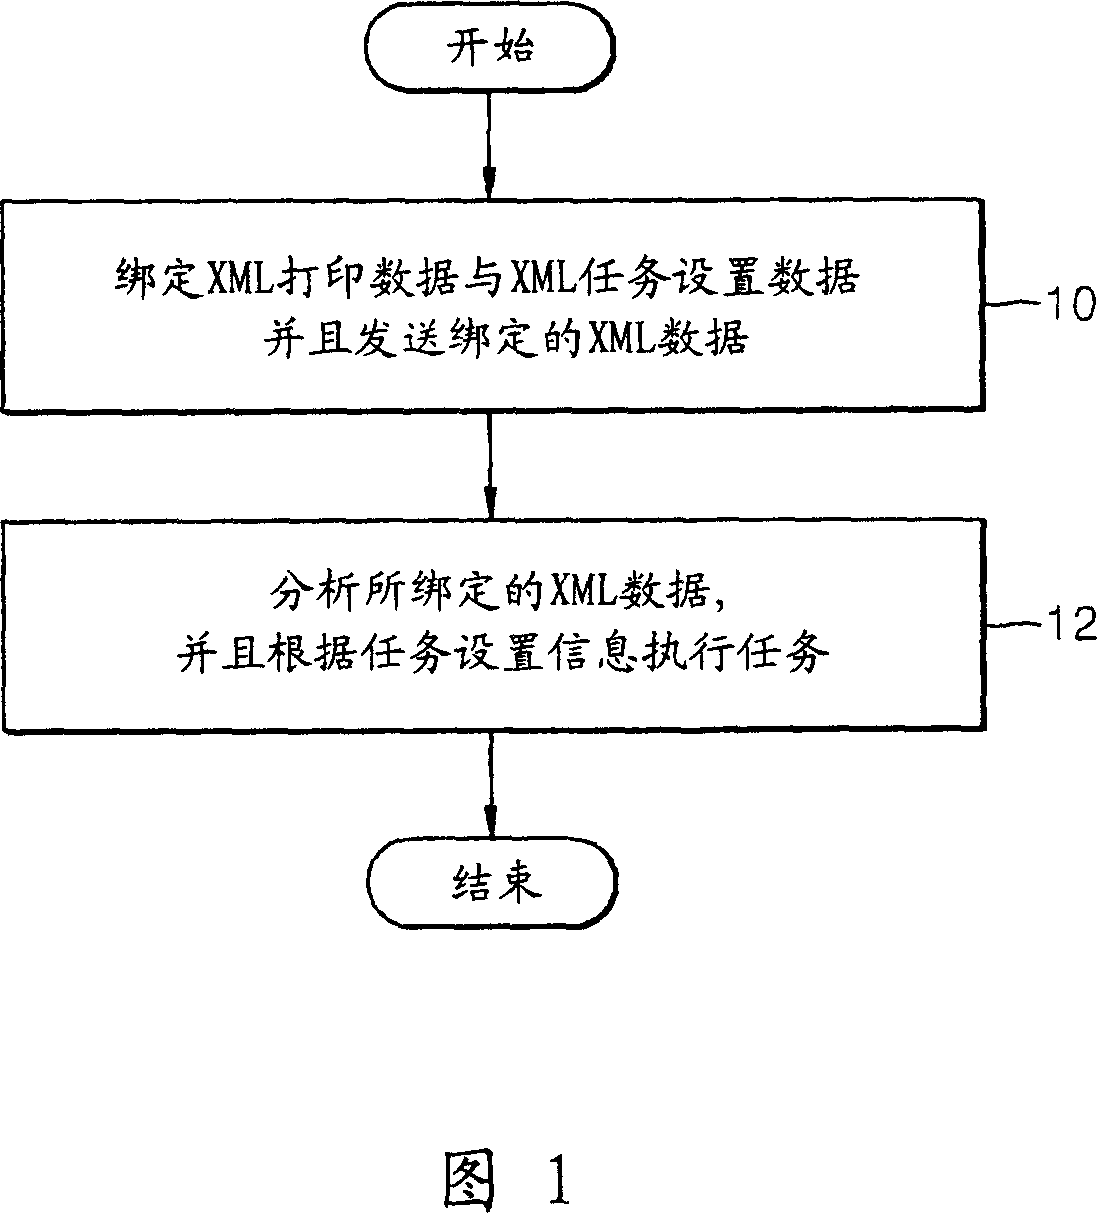 Method and system to form image using xml data